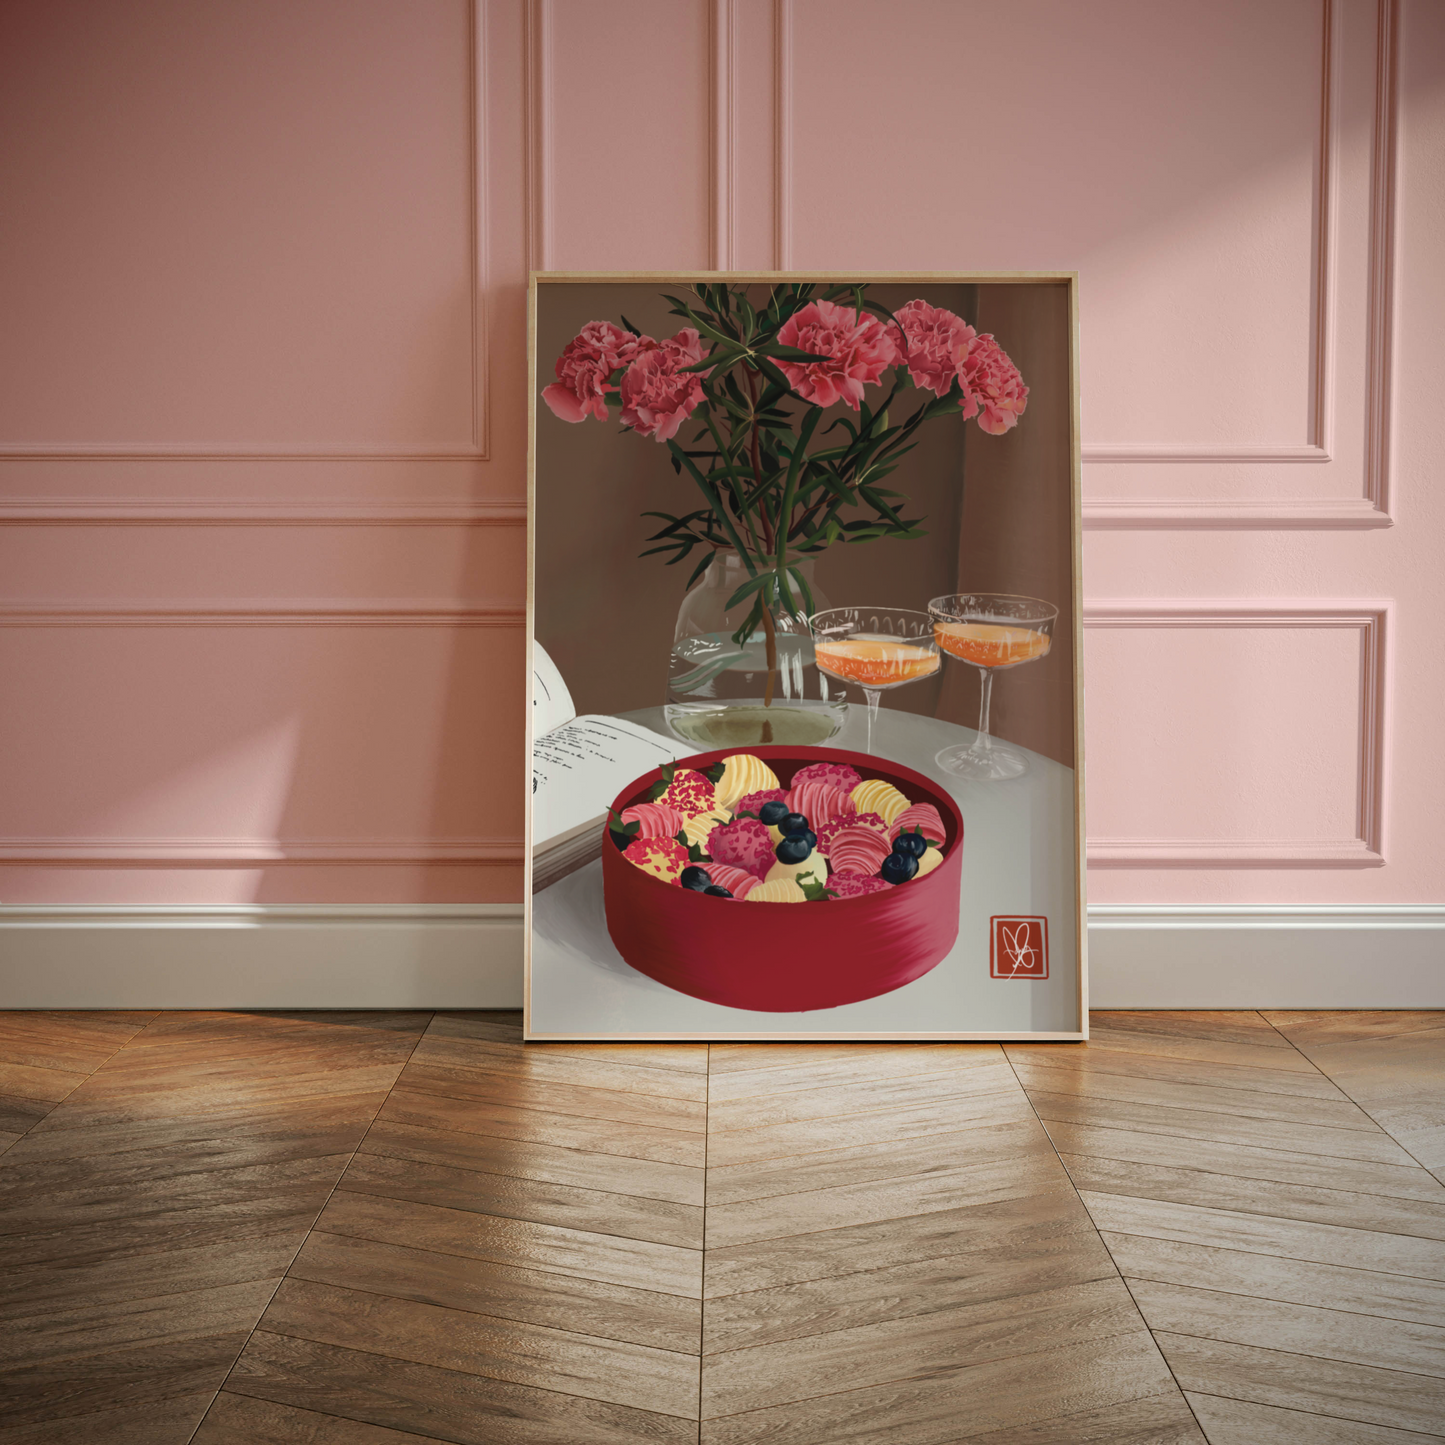 Floral and culinary delights converge in this hand-drawn digital painting by Unwrapped Collections of peonies and chocolates - a delightful addition to any living space. Wall Decor, Interior Design, Pink, Coupe Glasses, Vase of Flowers. Strawberry covered choclates.